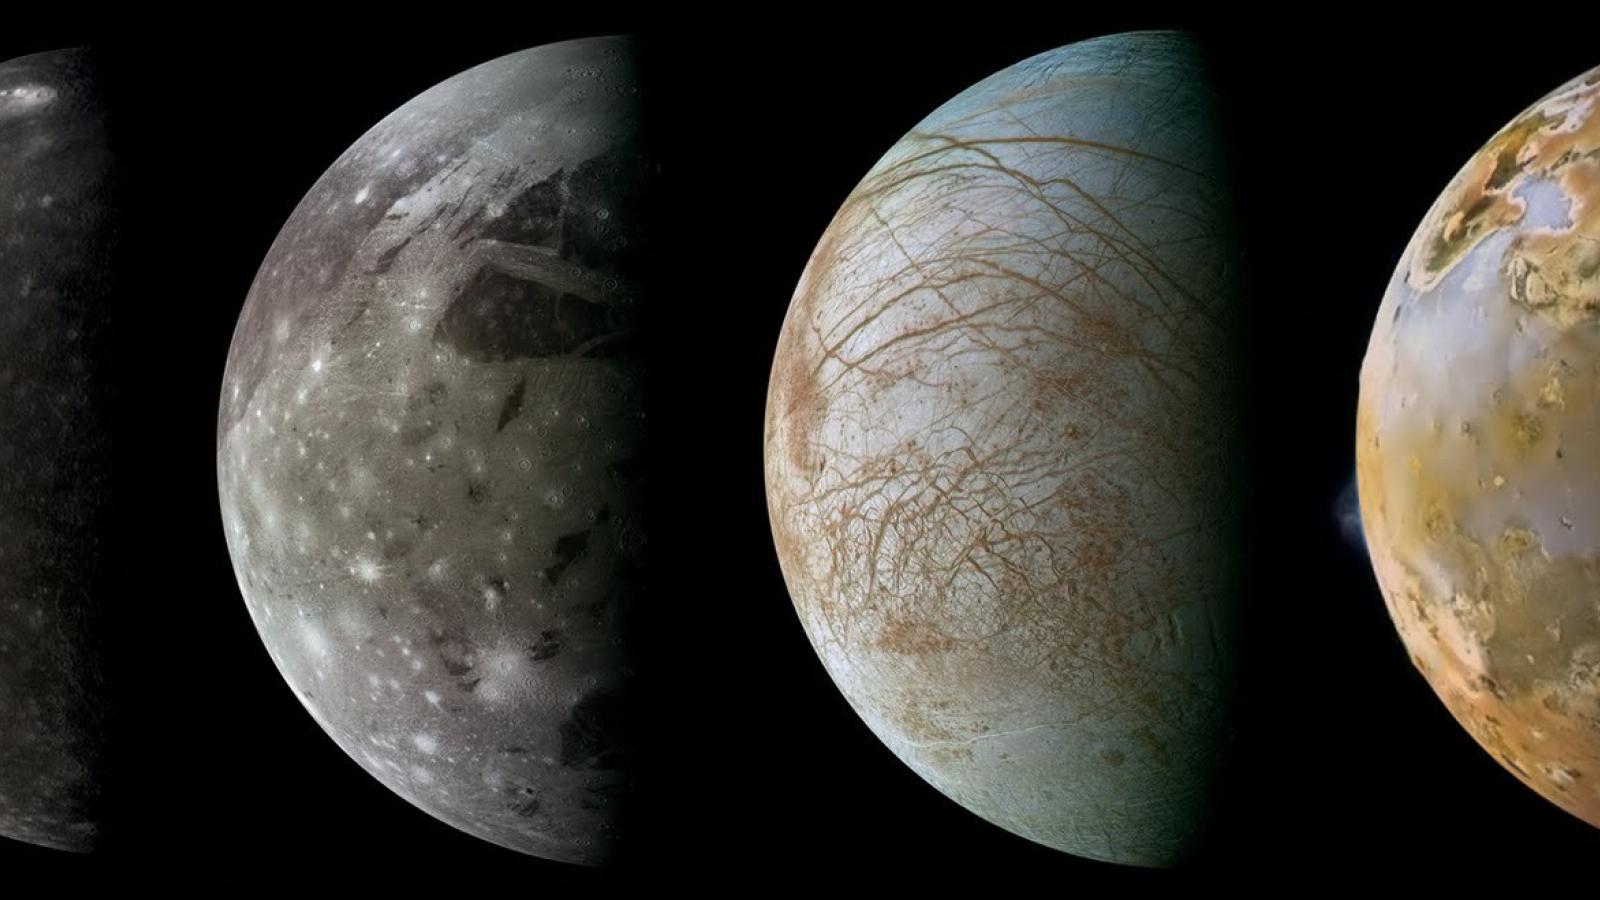 NASA photo of 4 of Jupiters largest moons at 1st quarter phase, left to right Callisto, Ganymede, Europa and Io